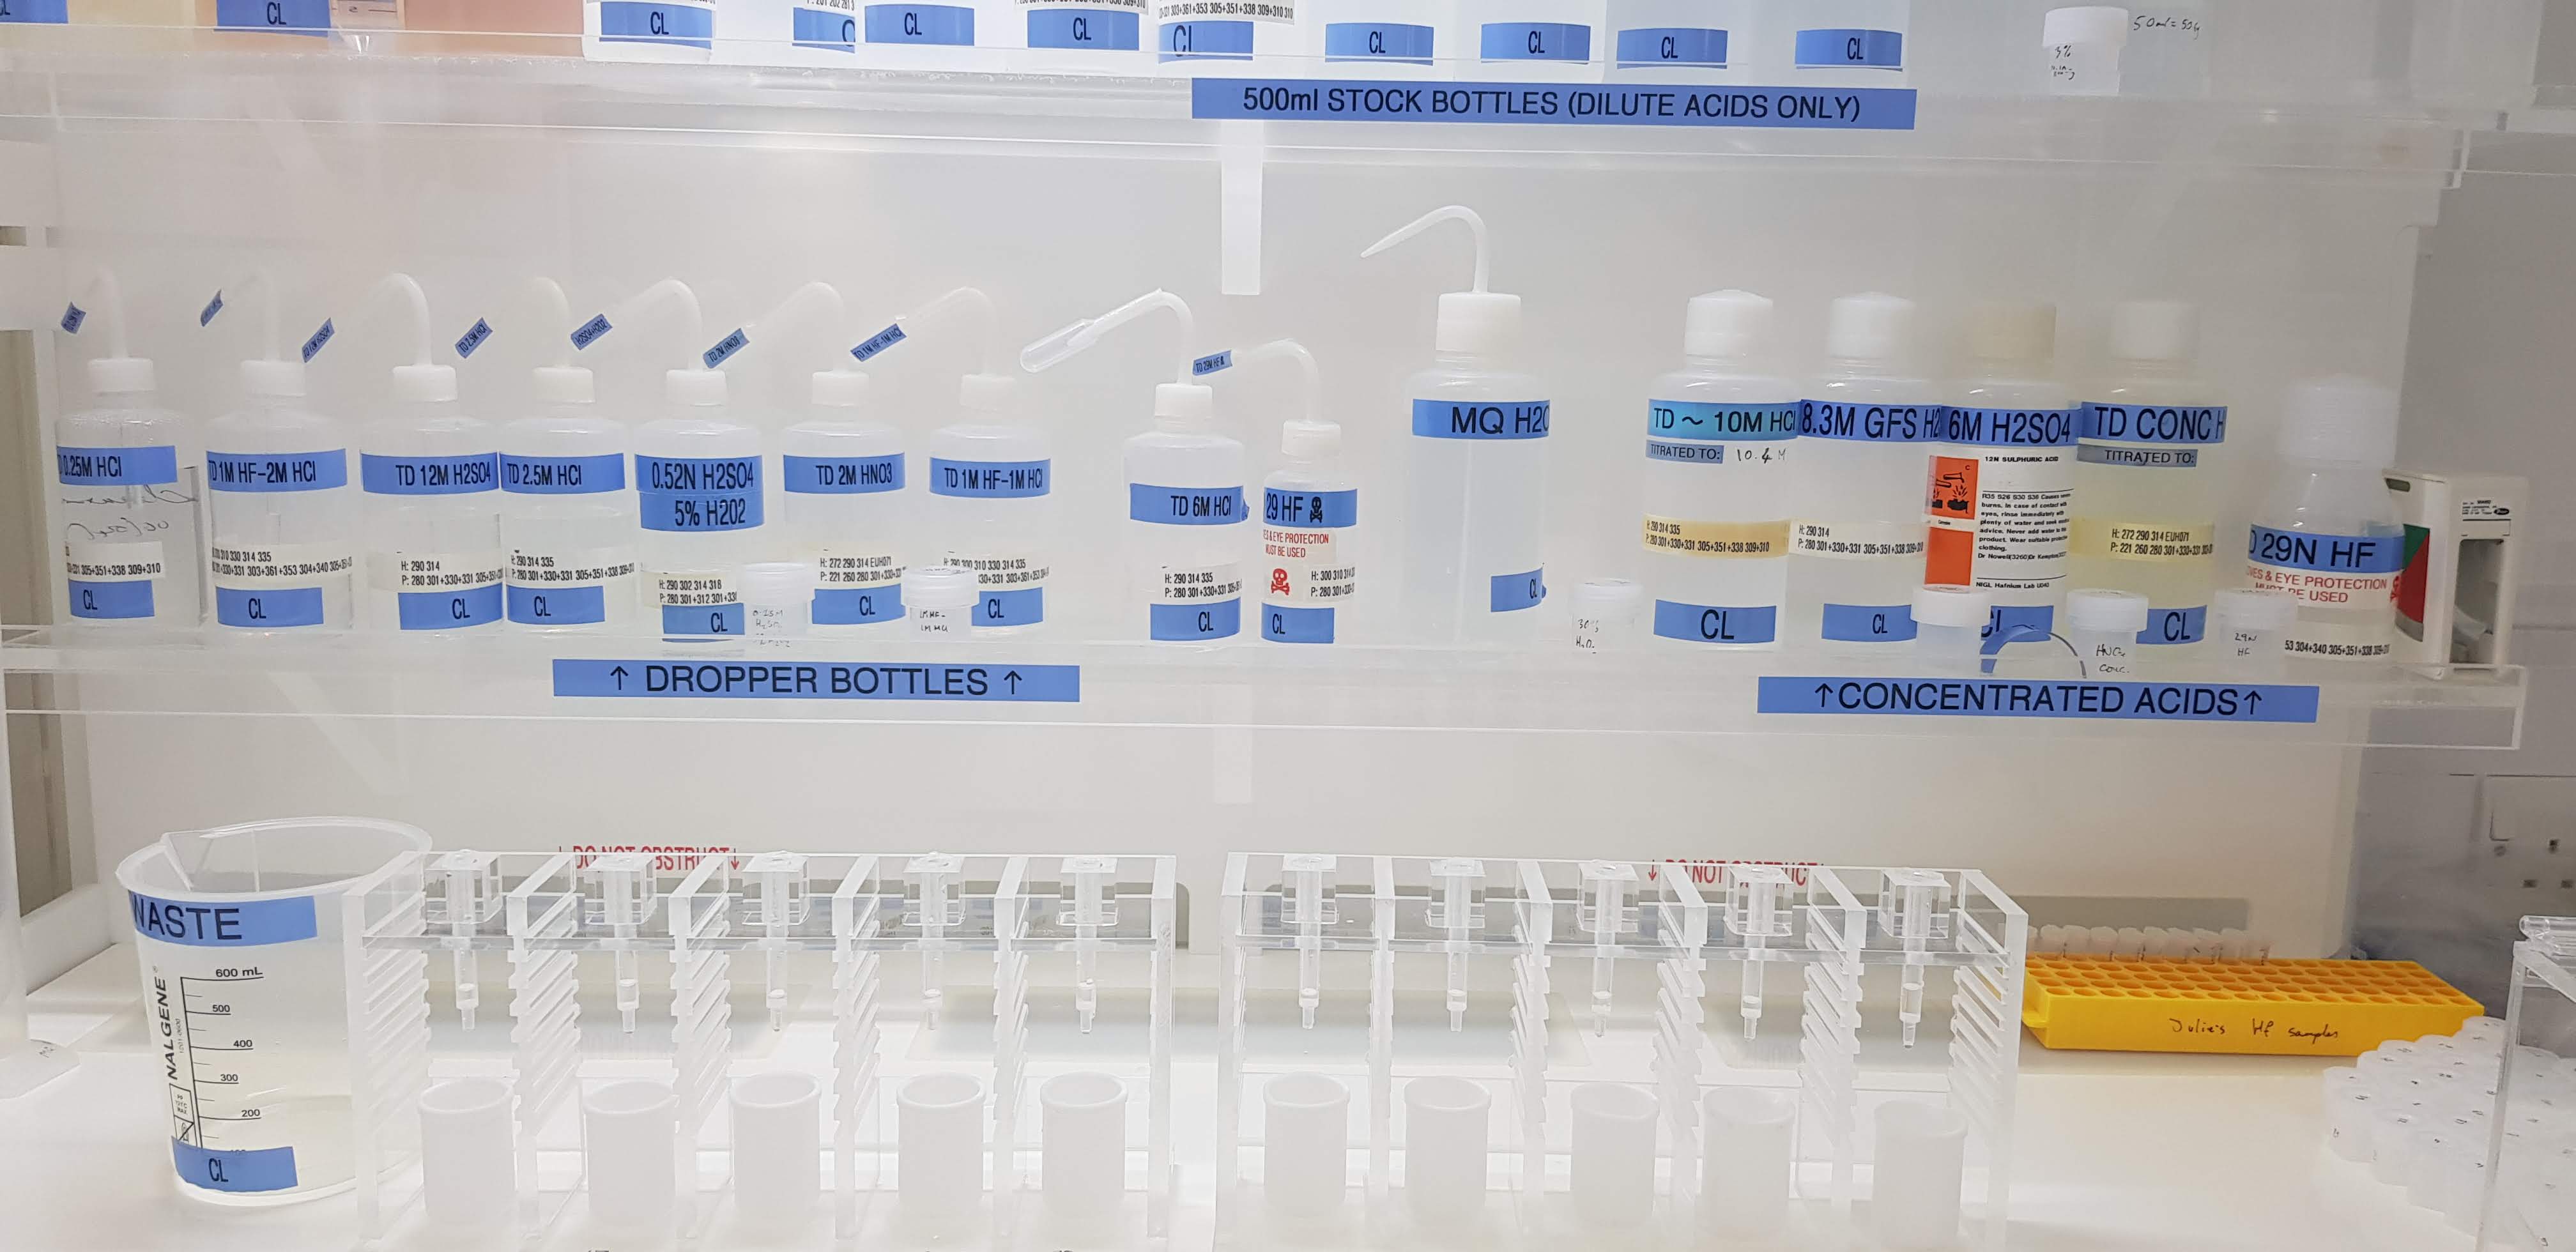 Laboratory shelf with clear and white beakers, bottles, and other containers with blue labels